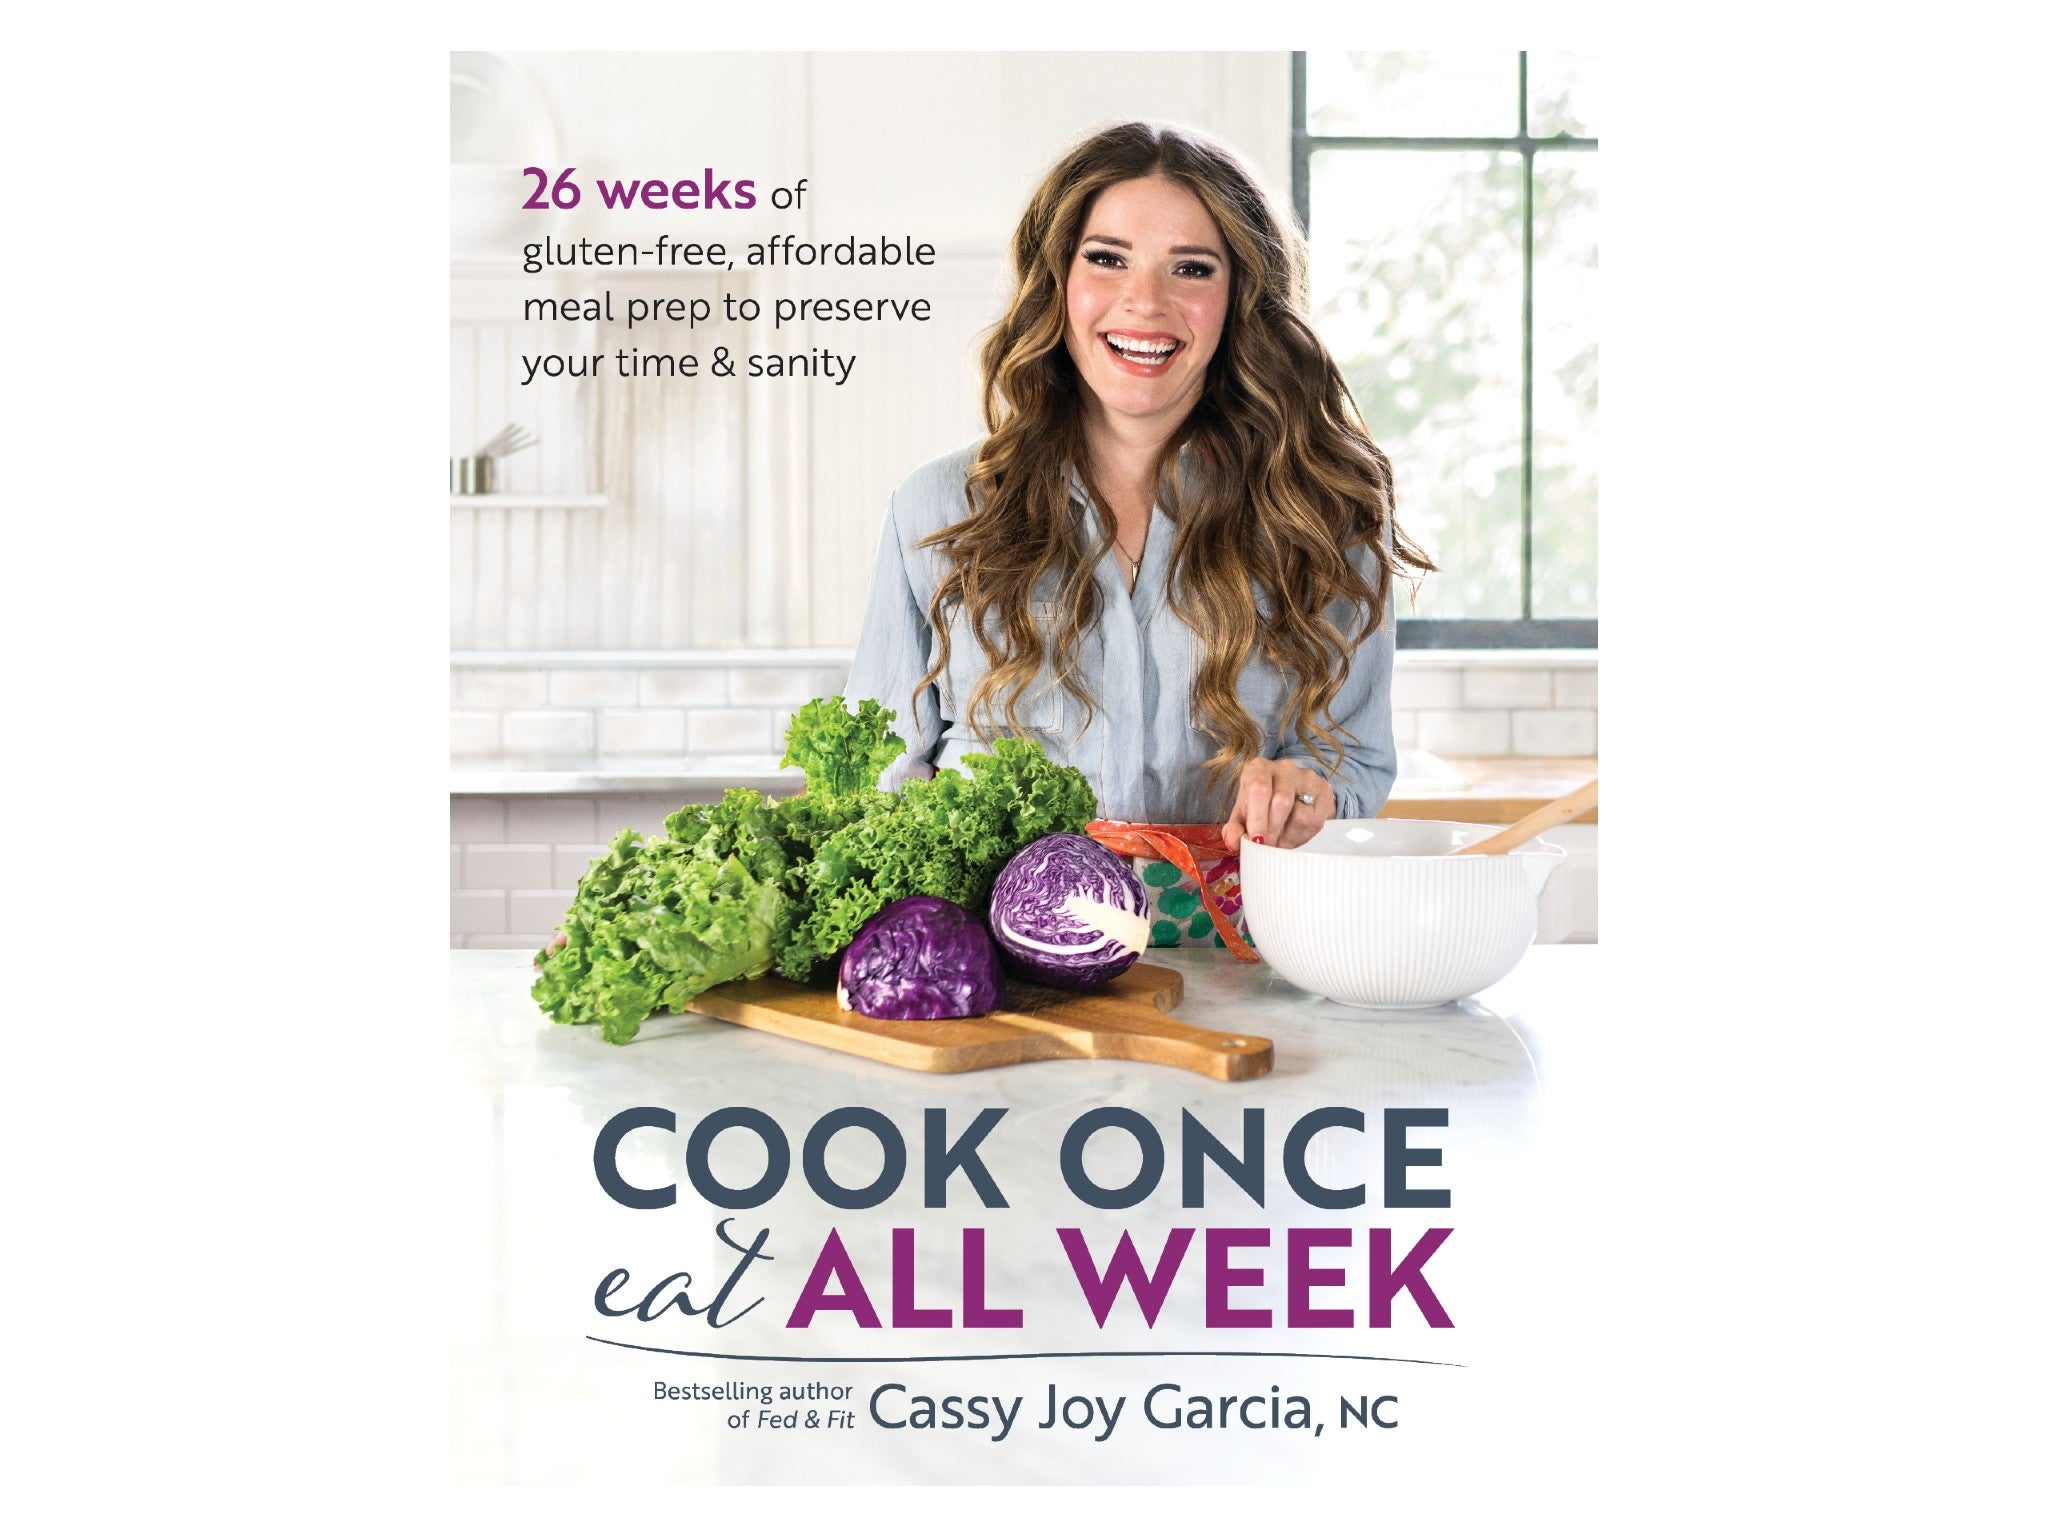 ‘Cook Once, Eat All Week’ by Cassy Joy Garcia indybest.jpeg